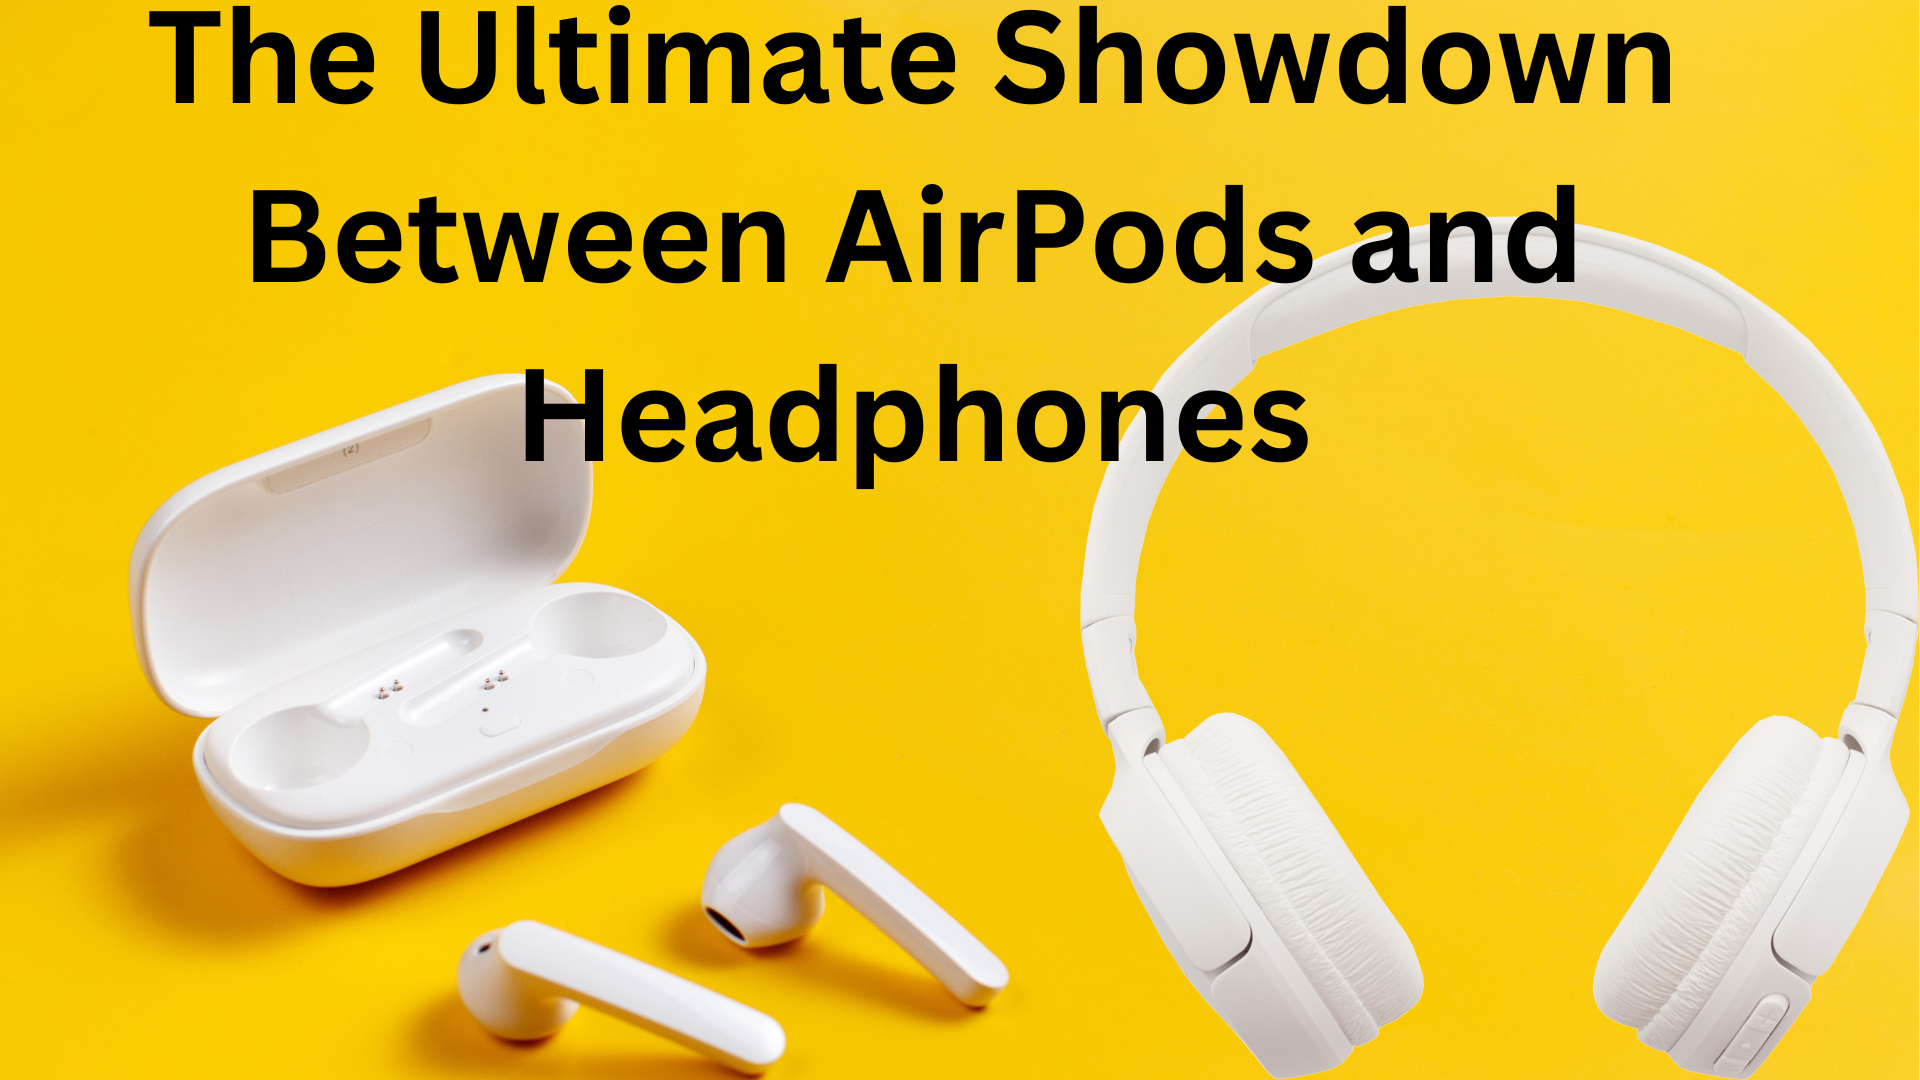 The Ultimate Showdown Between AirPods and Headphones